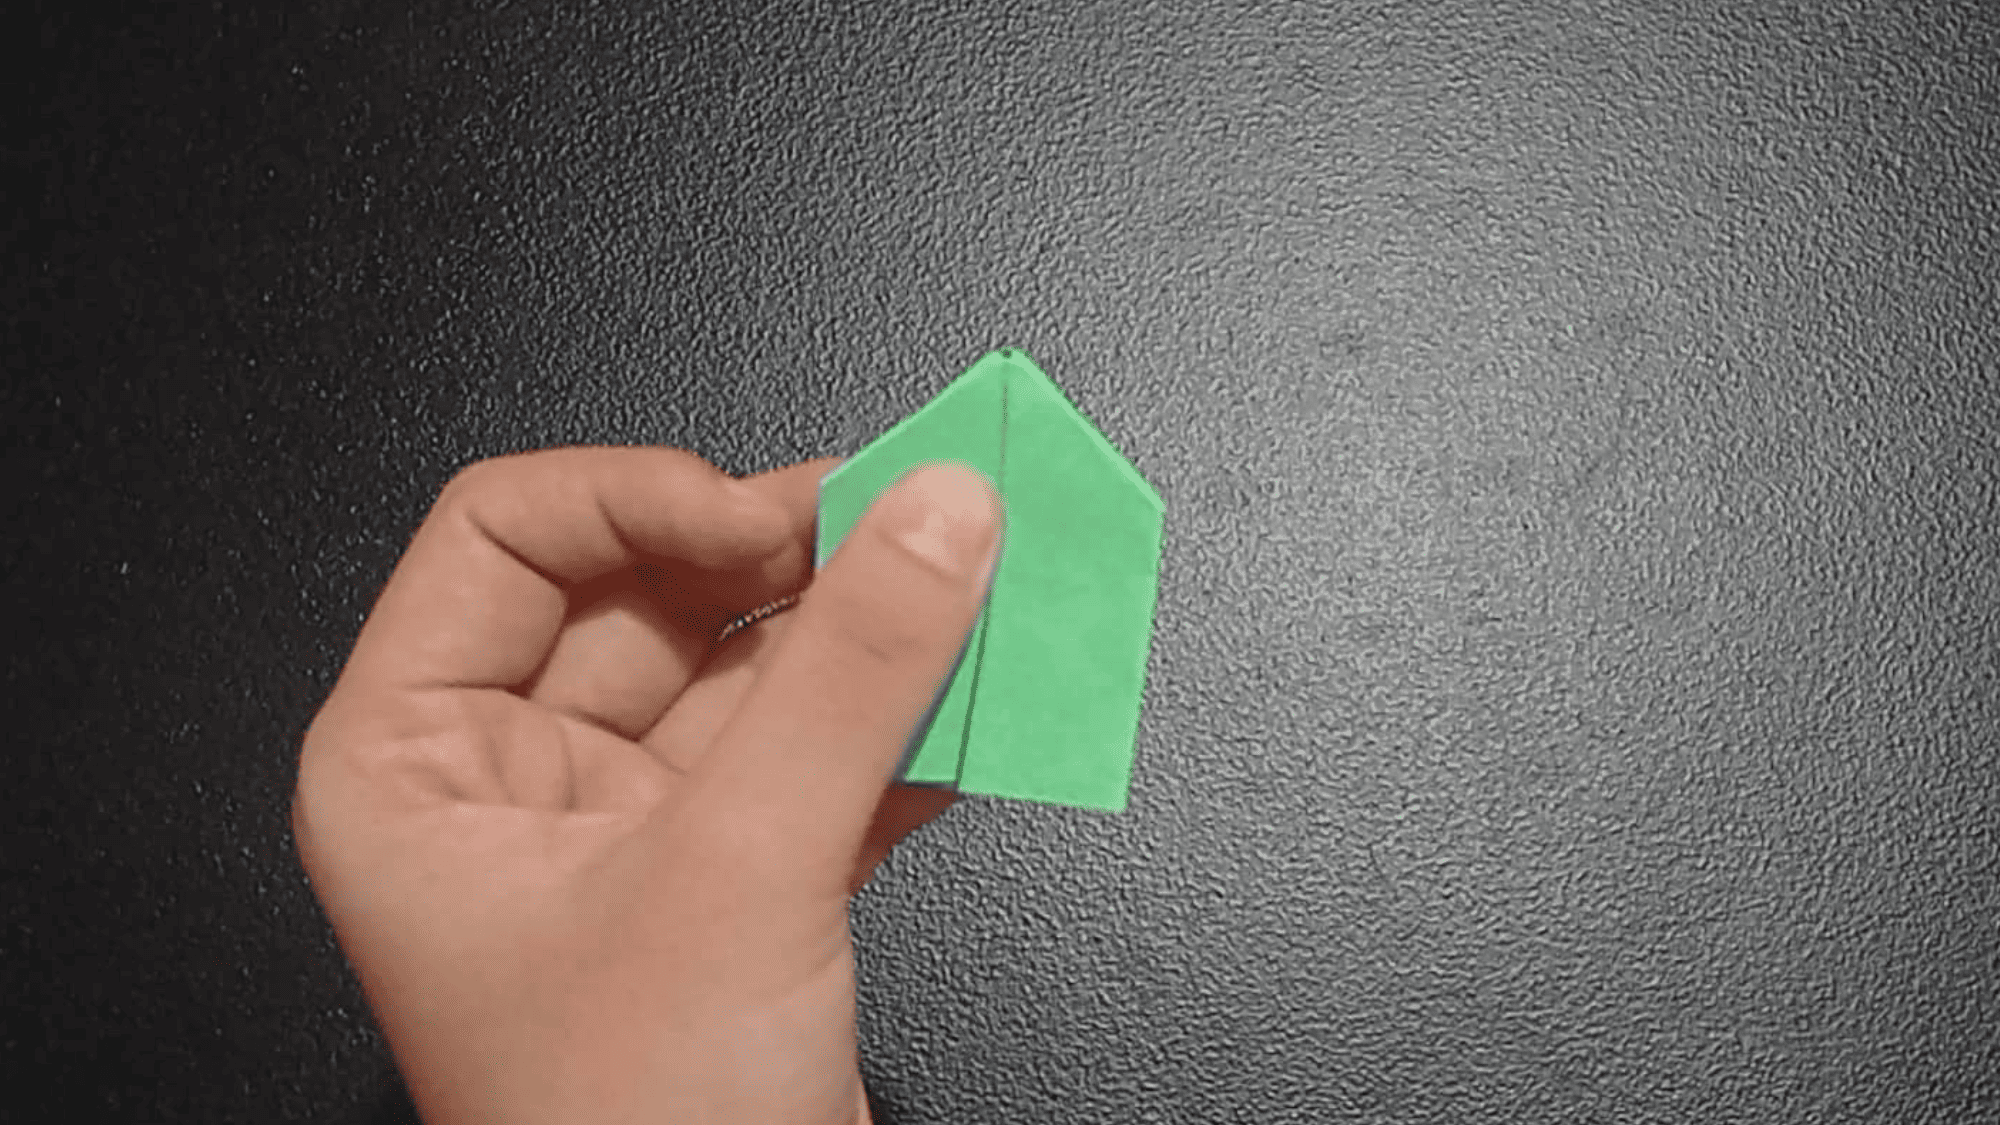 origami ring instructions step 6.5